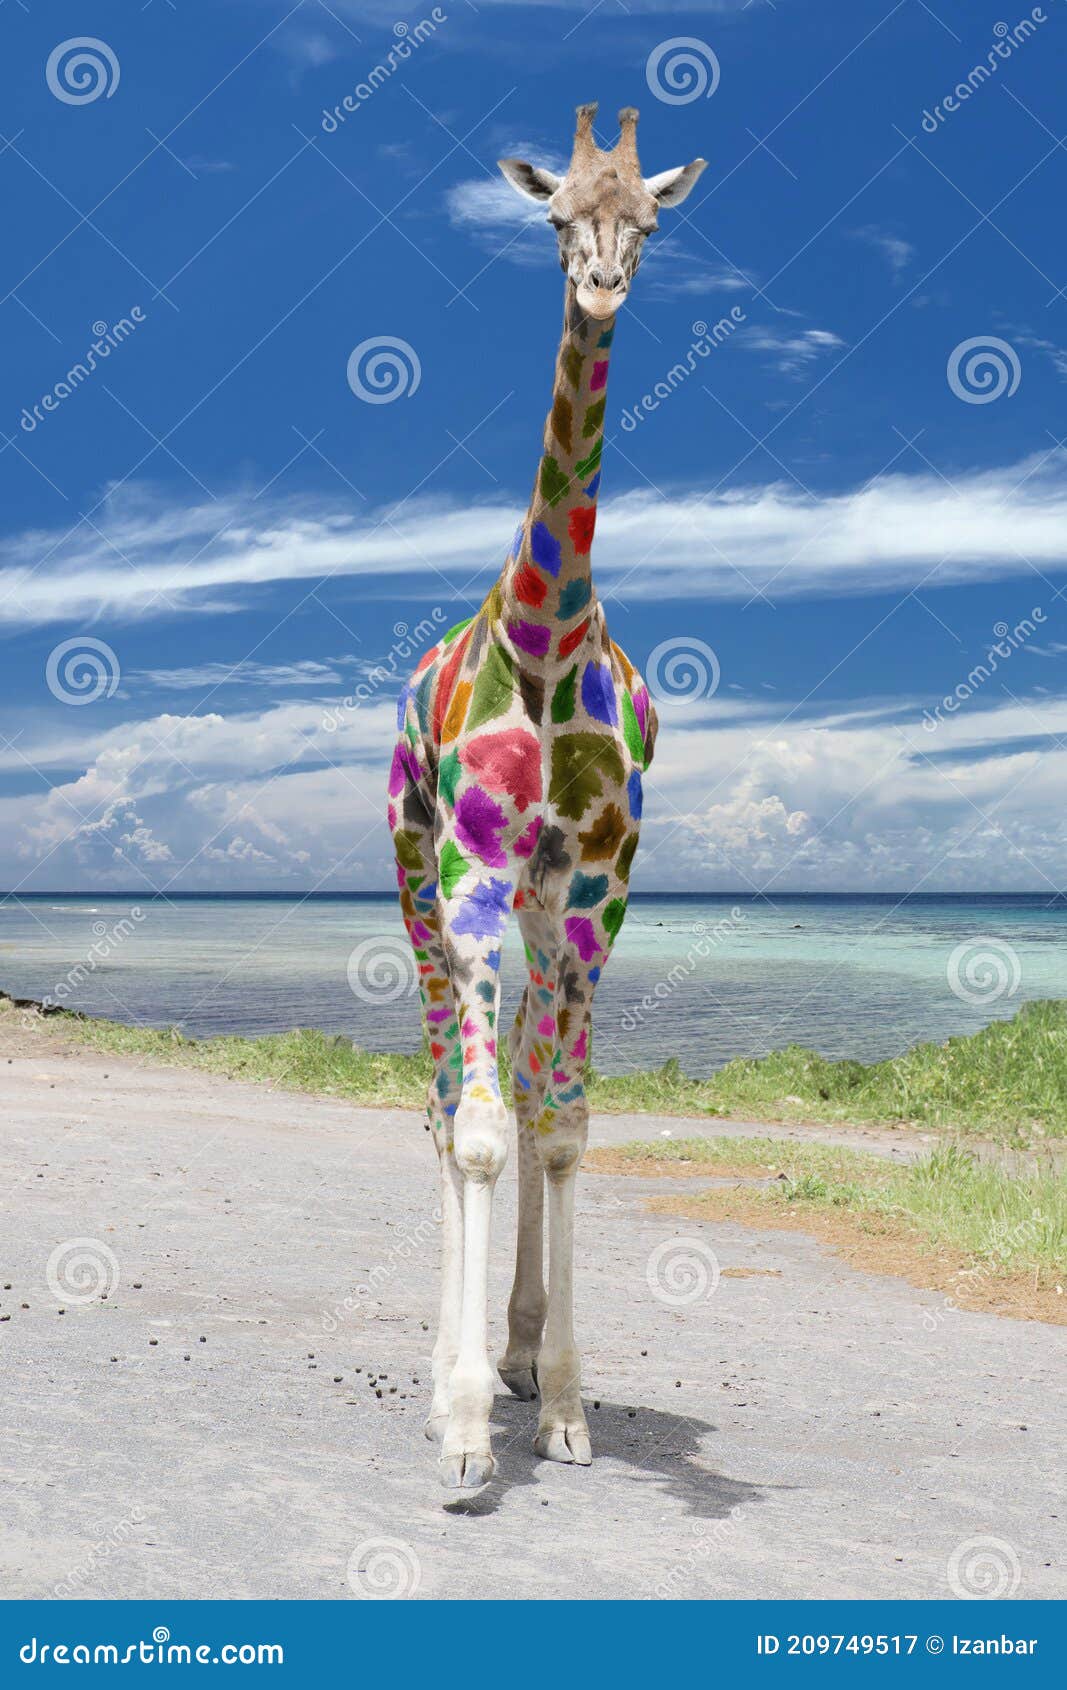 carnival arlequin giraffe coming to you on deep blue sky background